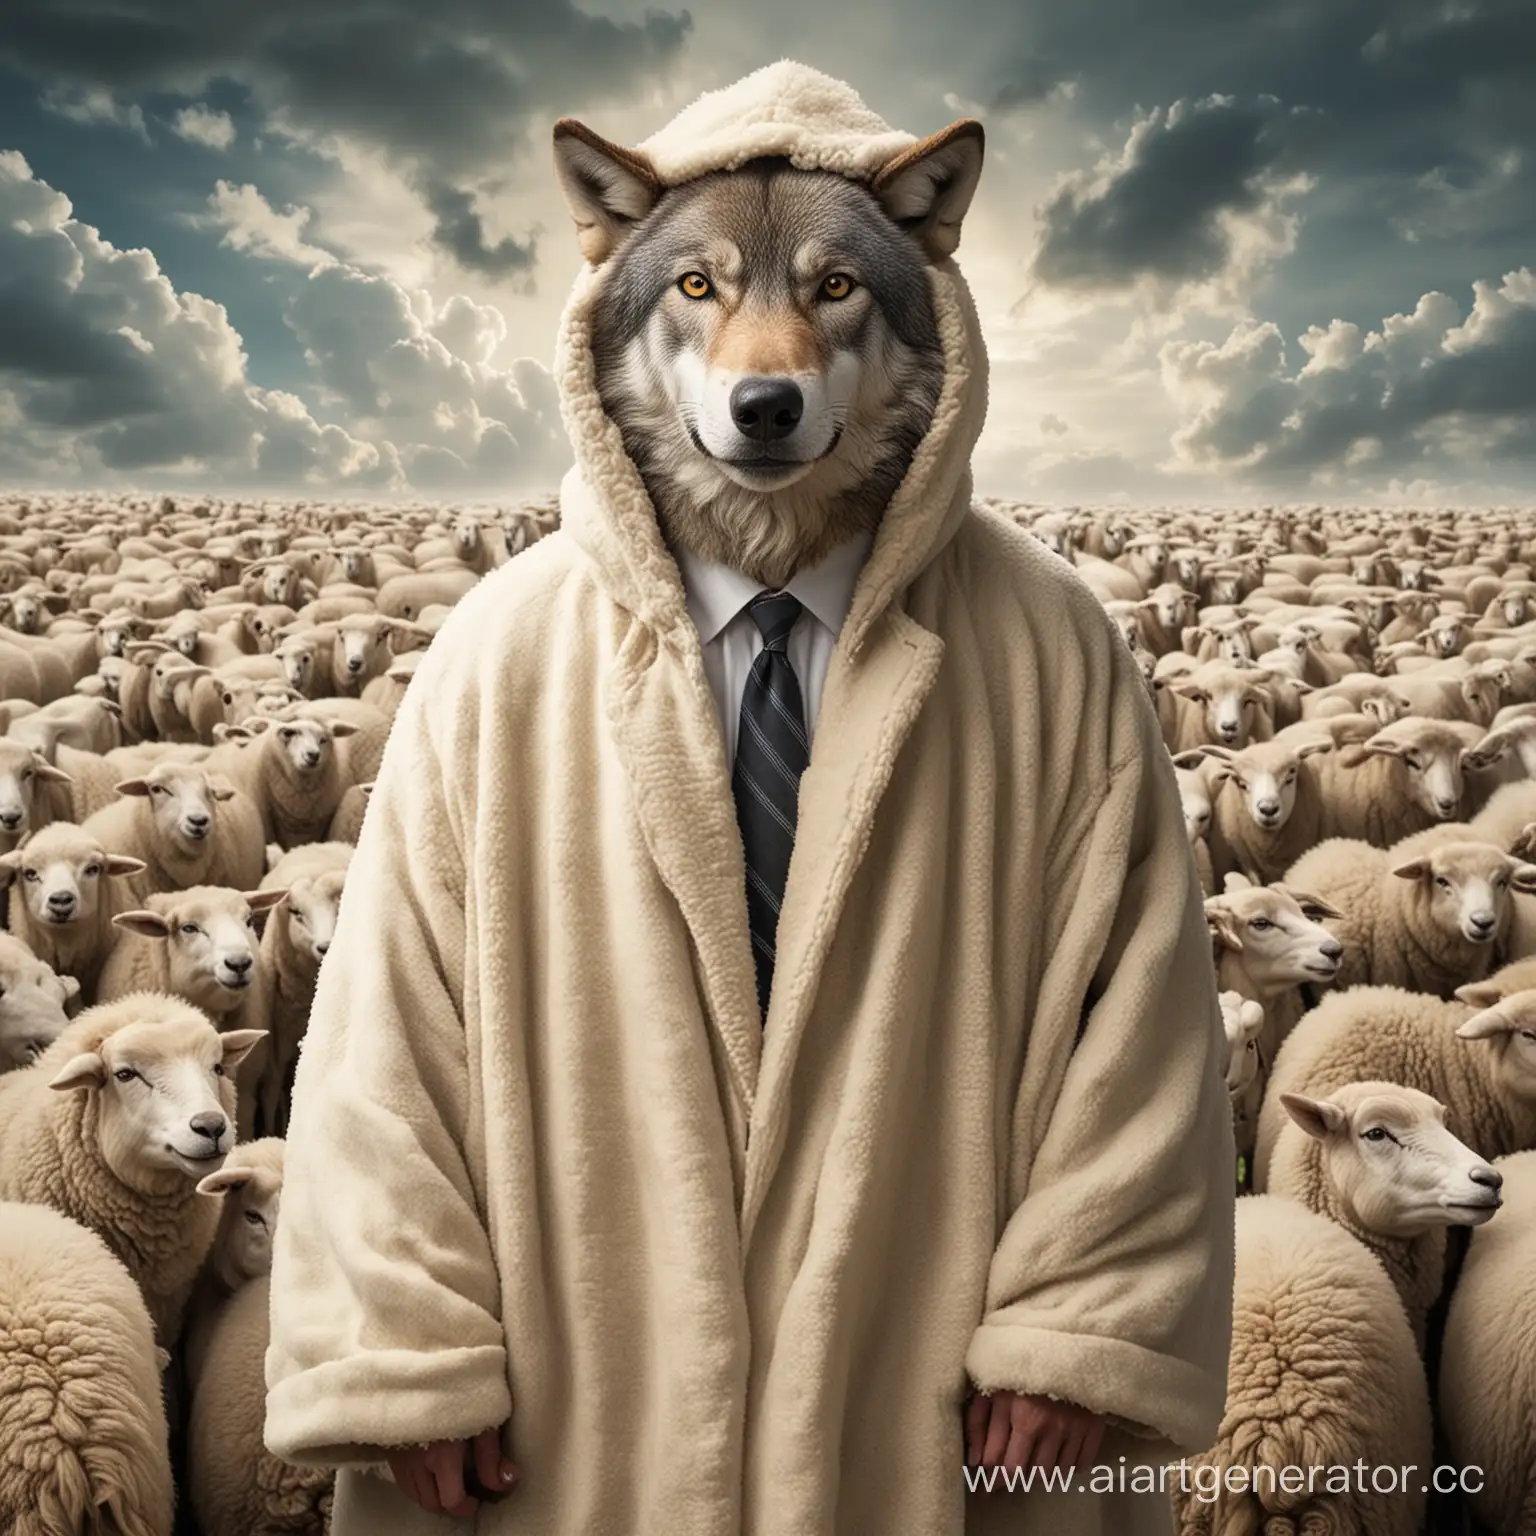 wolf in sheep's clothing